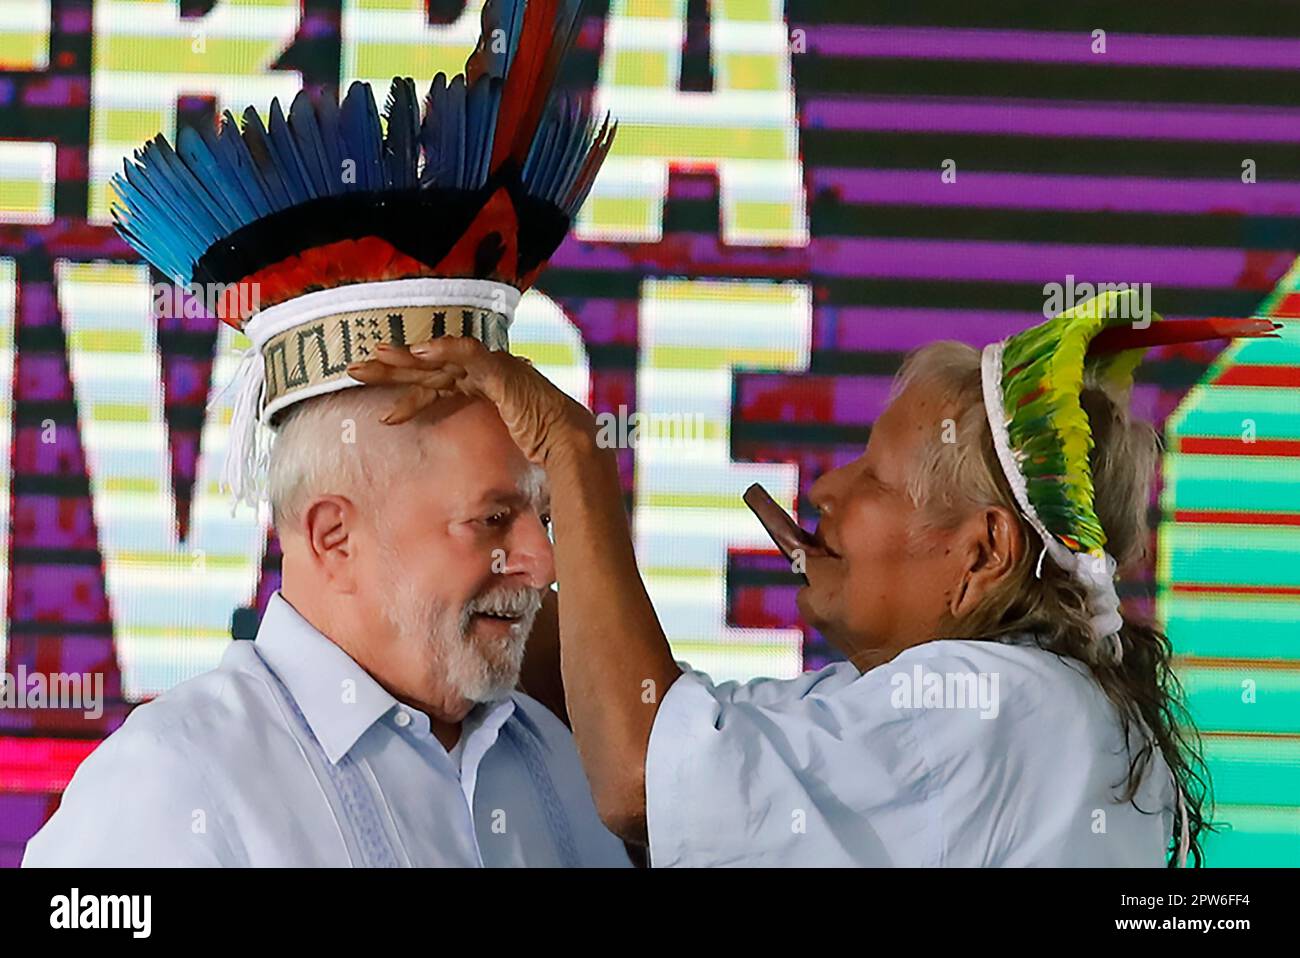 BRASÍLIA, DF - 28.04.2023: LULA VISITA ACAMPAMENTO TERRA LIVRE - President Lula visits and participates in the closing of Camp Terra Livre, in Brasília, this Friday, the 28th. During the visit, Lula announced measures that will benefit the various indigenous communities. In the photos, Cacique Raoni, 93 years old, participates in the event. - Location: Terra LIvre Camp - Brasília - DF -Photo:Francisco Stuckert/FotoArena (Photo: Francisco Stuckert/Fotoarena) Stock Photo